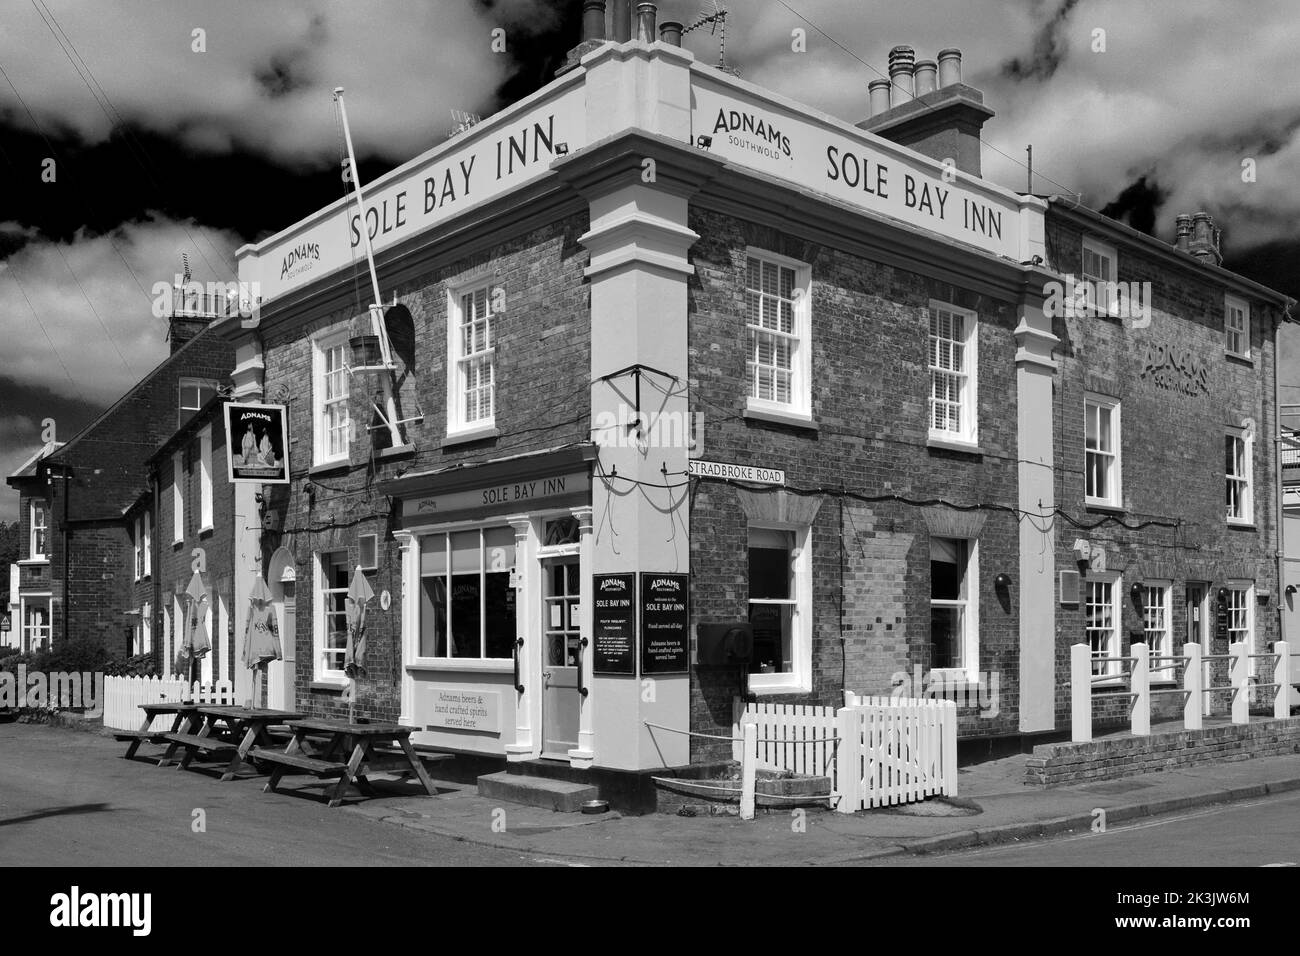 The Sole Bay Inn pub, Southwold town, Suffolk County, England, UK Stock Photo